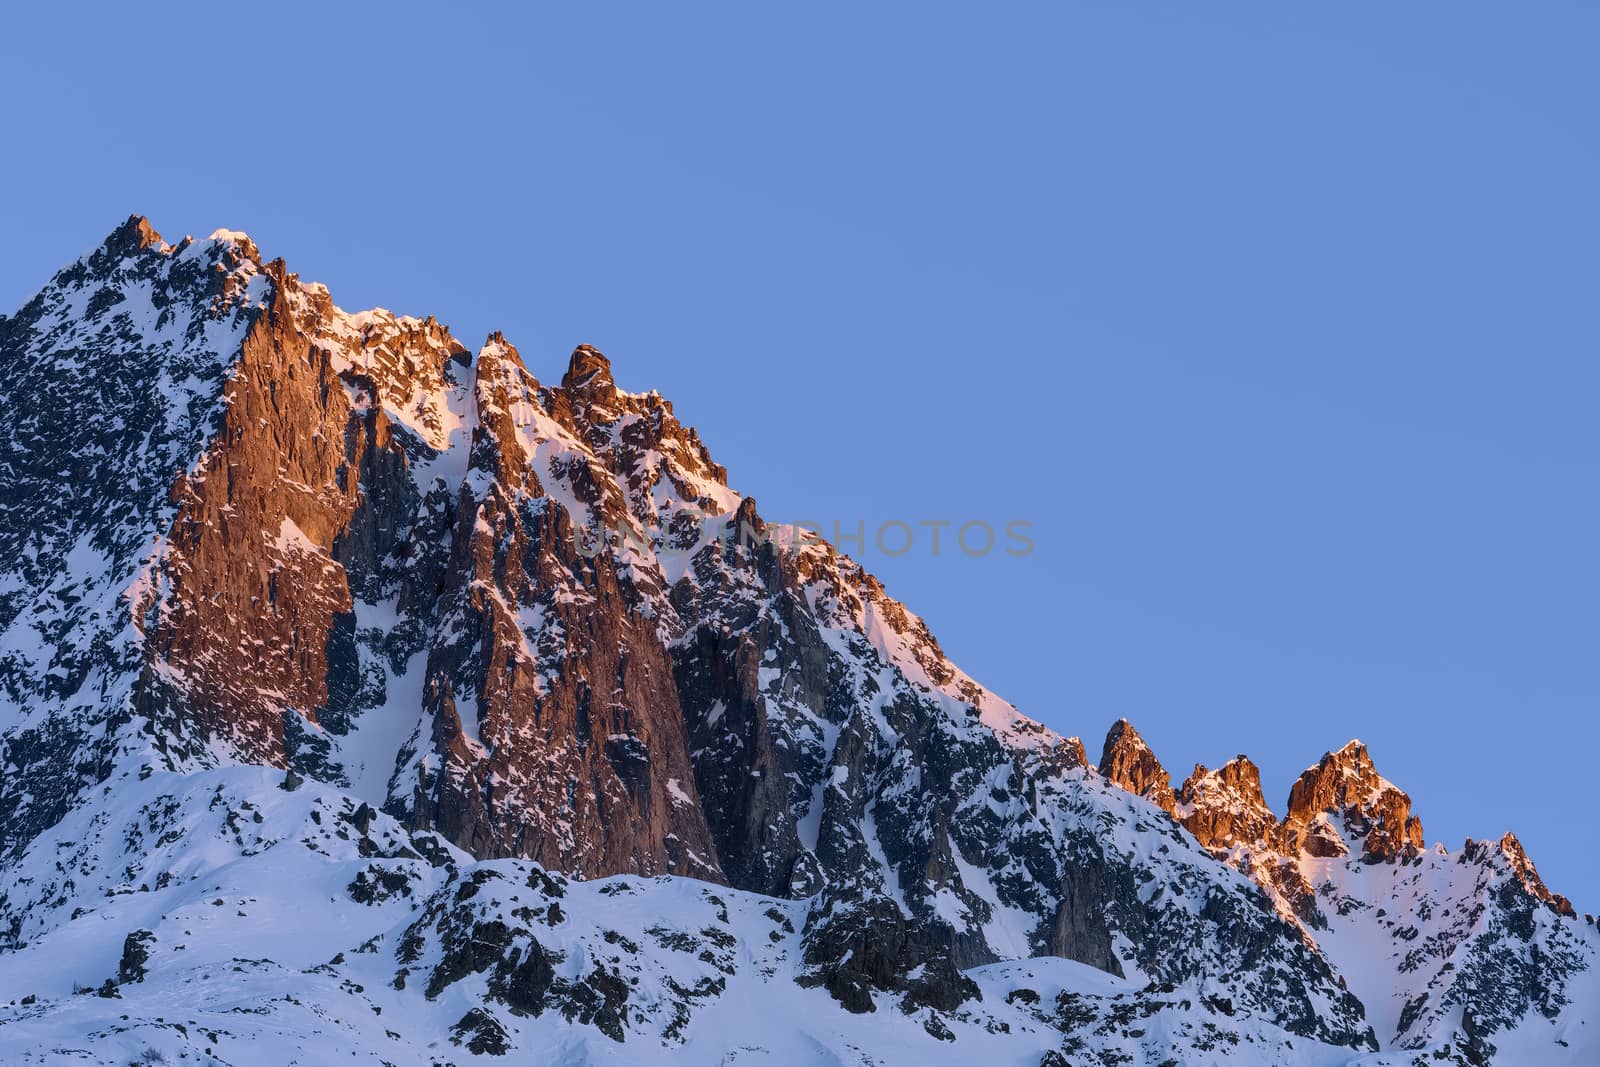 The beautiful snow covered mountains around Passo Tonale in winter, Italy.